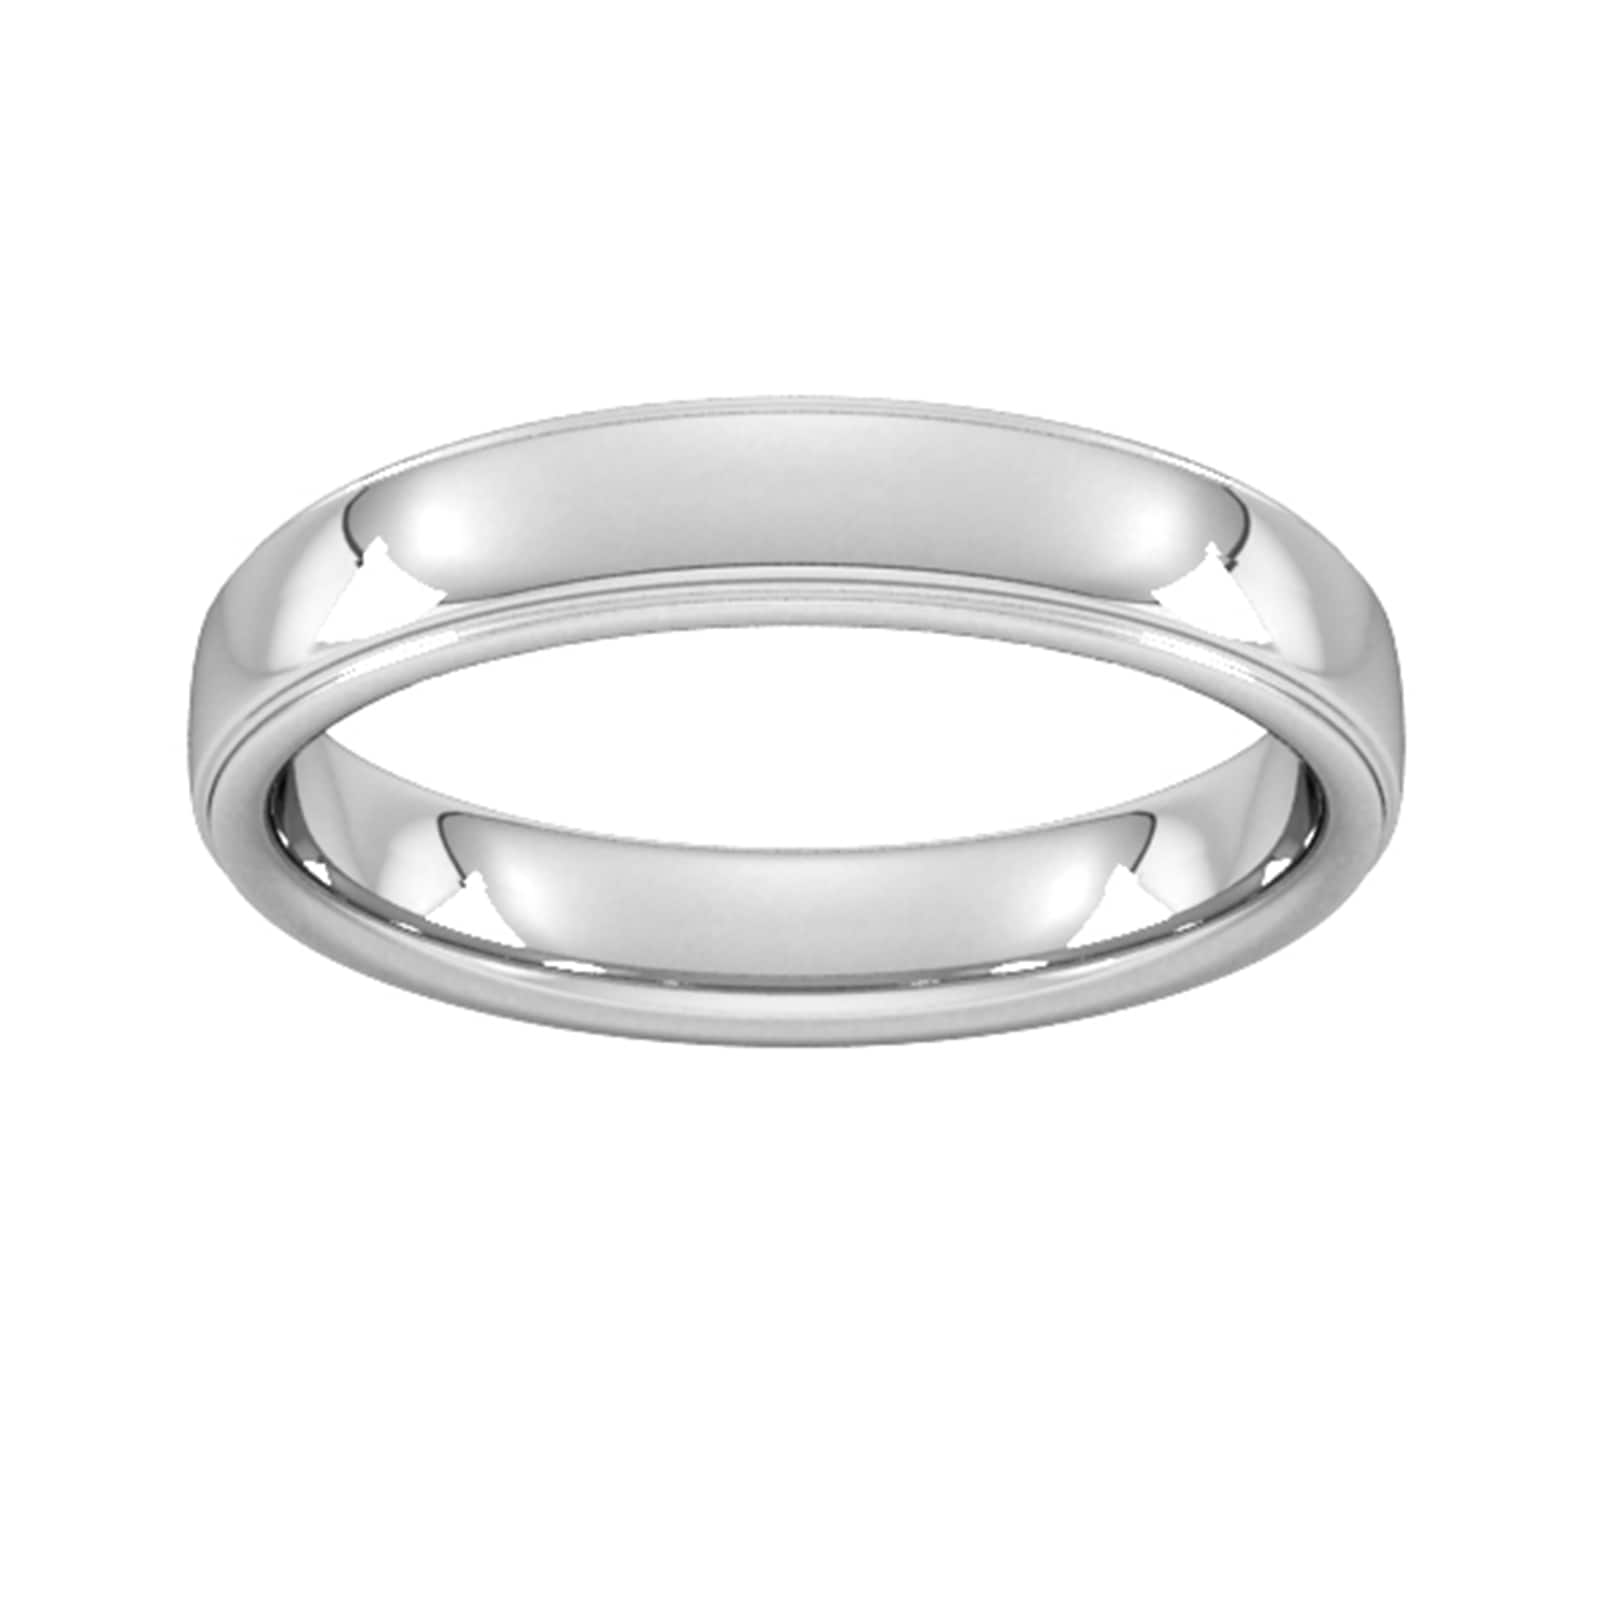 4mm Slight Court Standard Polished Finish With Grooves Wedding Ring In 18 Carat White Gold - Ring Size R